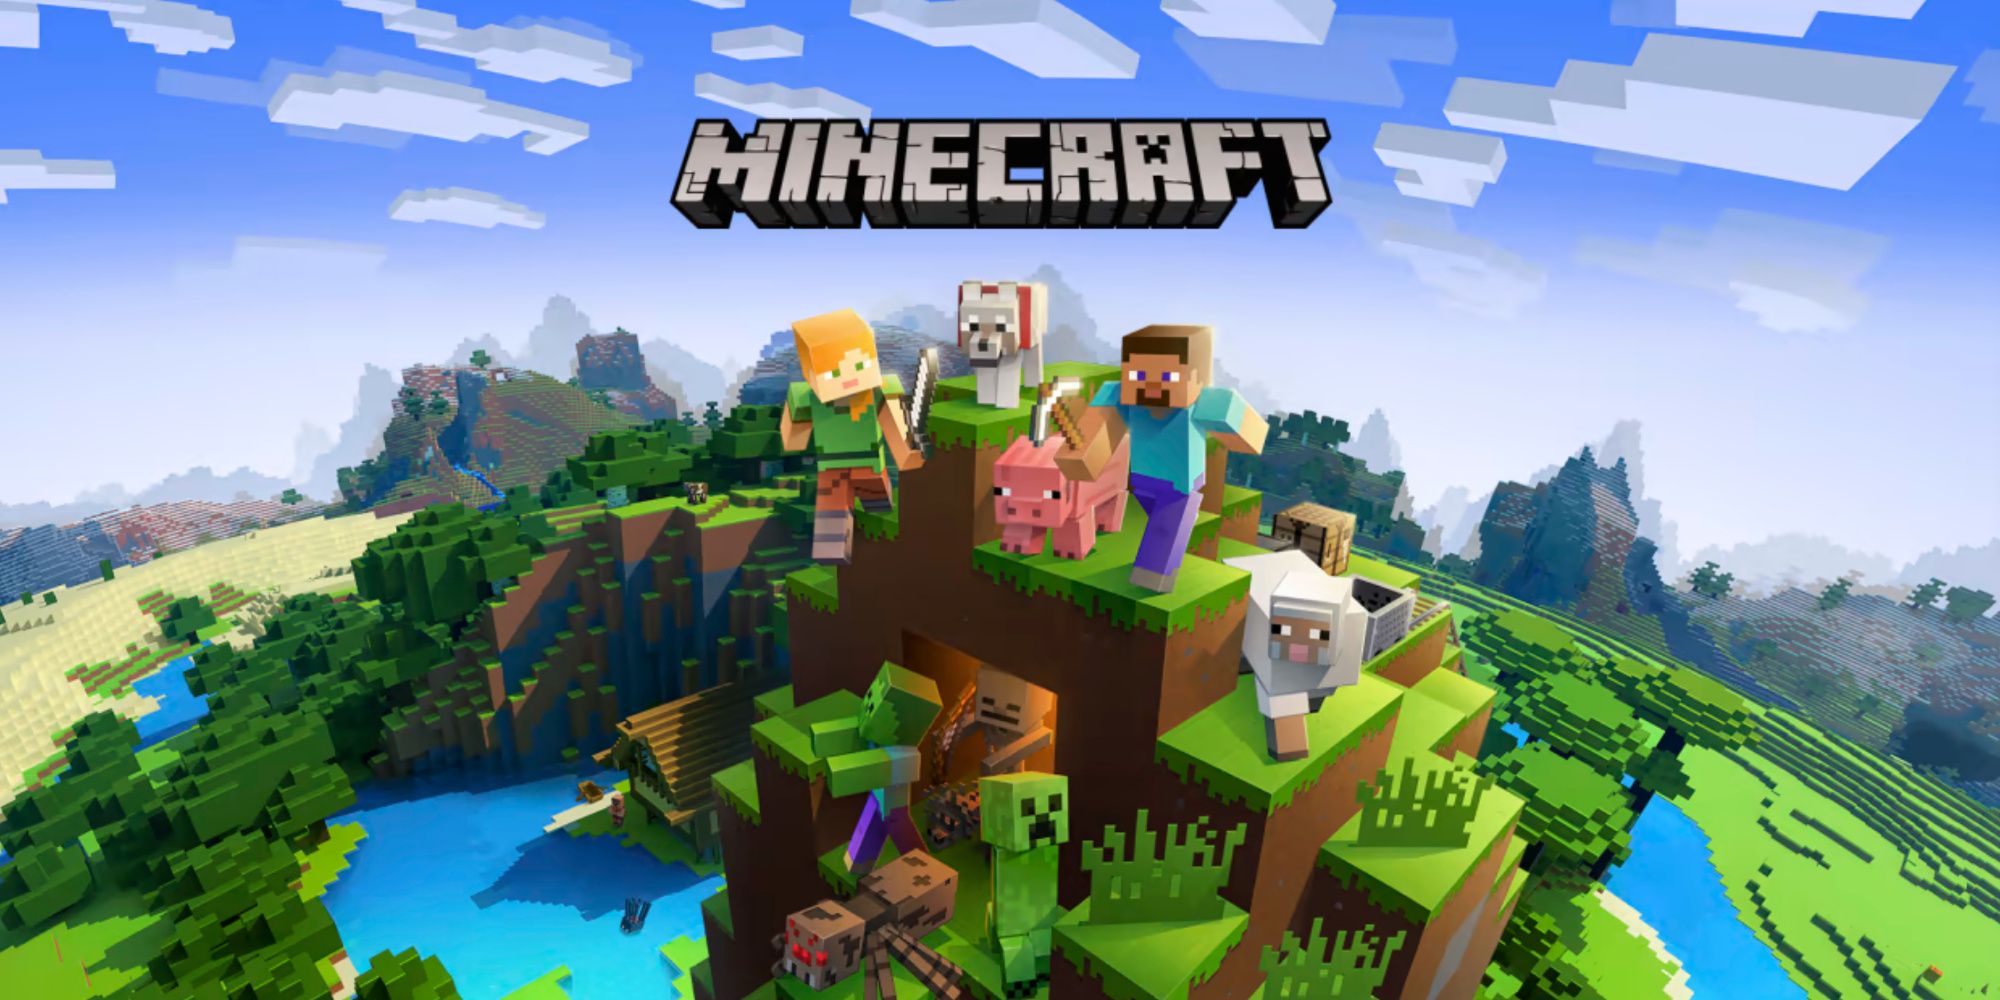 Promo art featuring characters in Minecraft